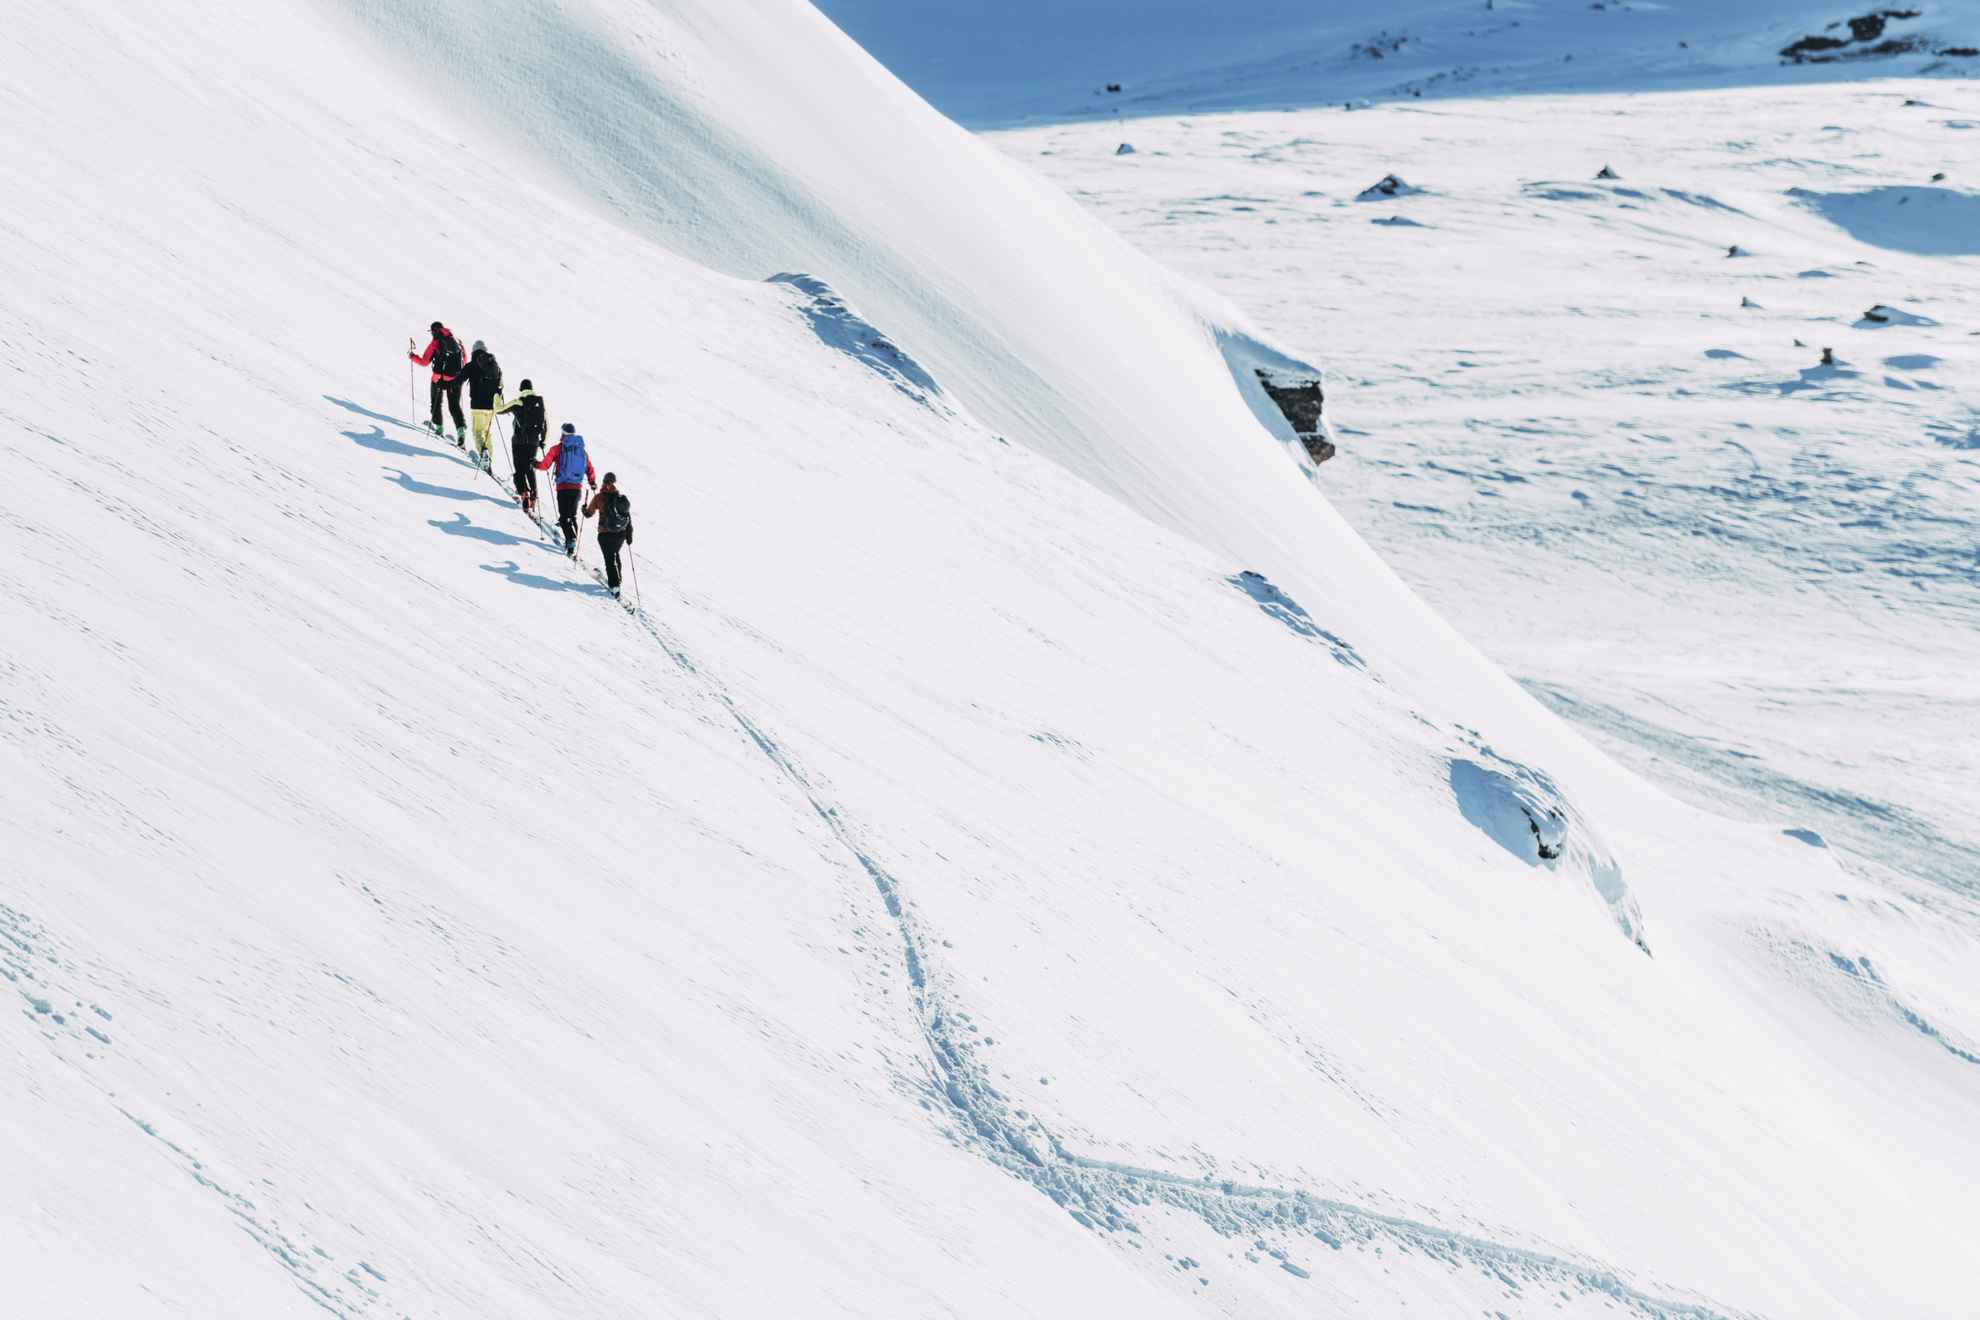 Five people with skis are on their way up a snow-covered mountain.